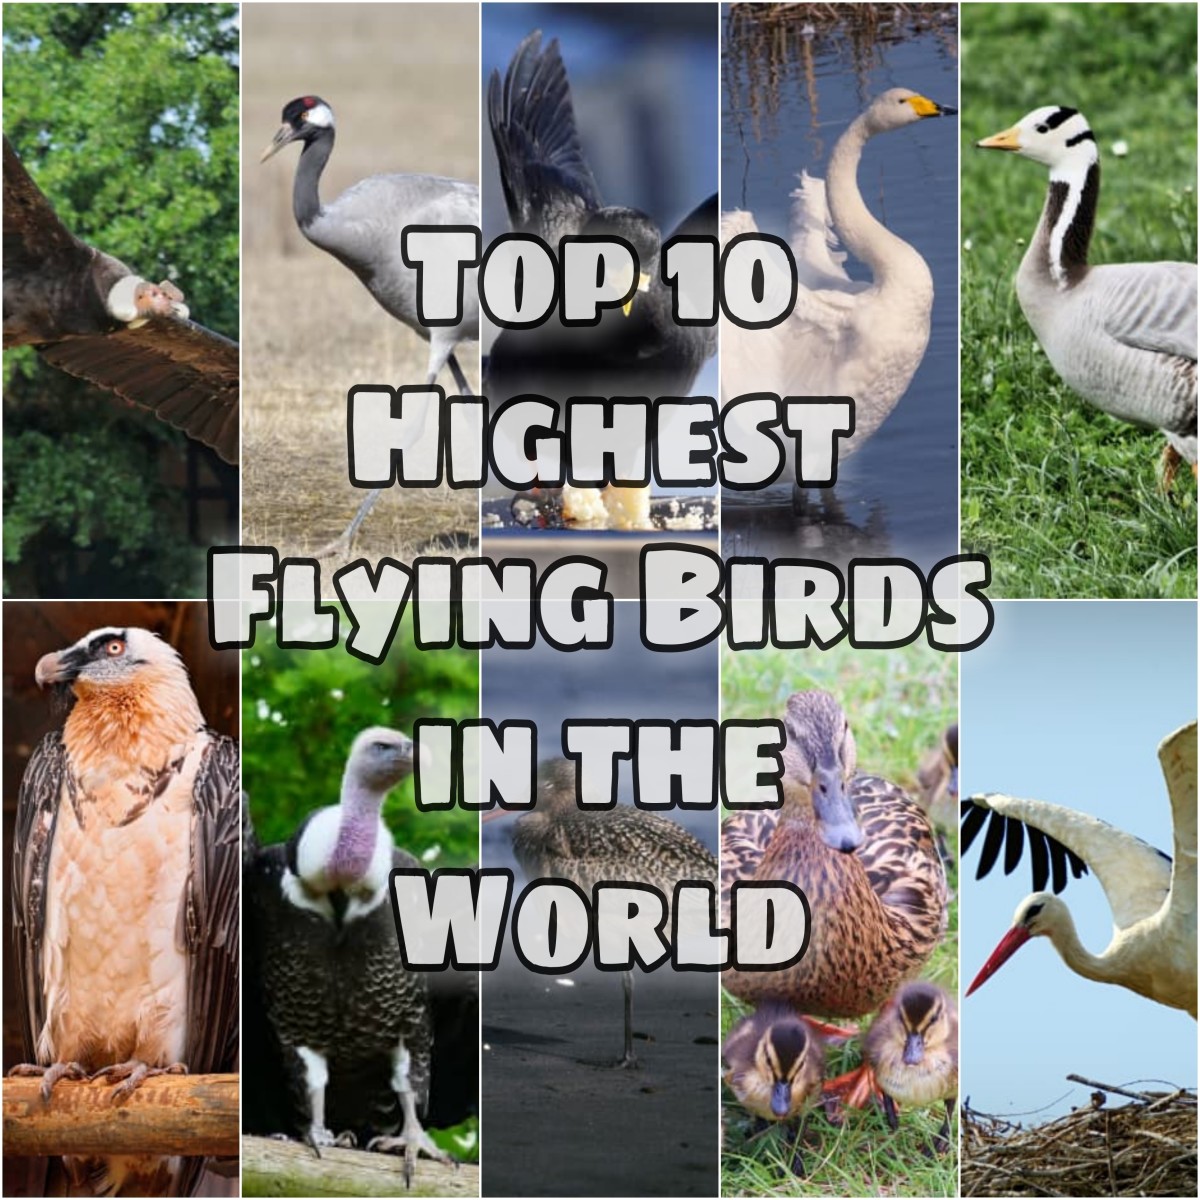 Top 10 Highest Flying Birds in the World